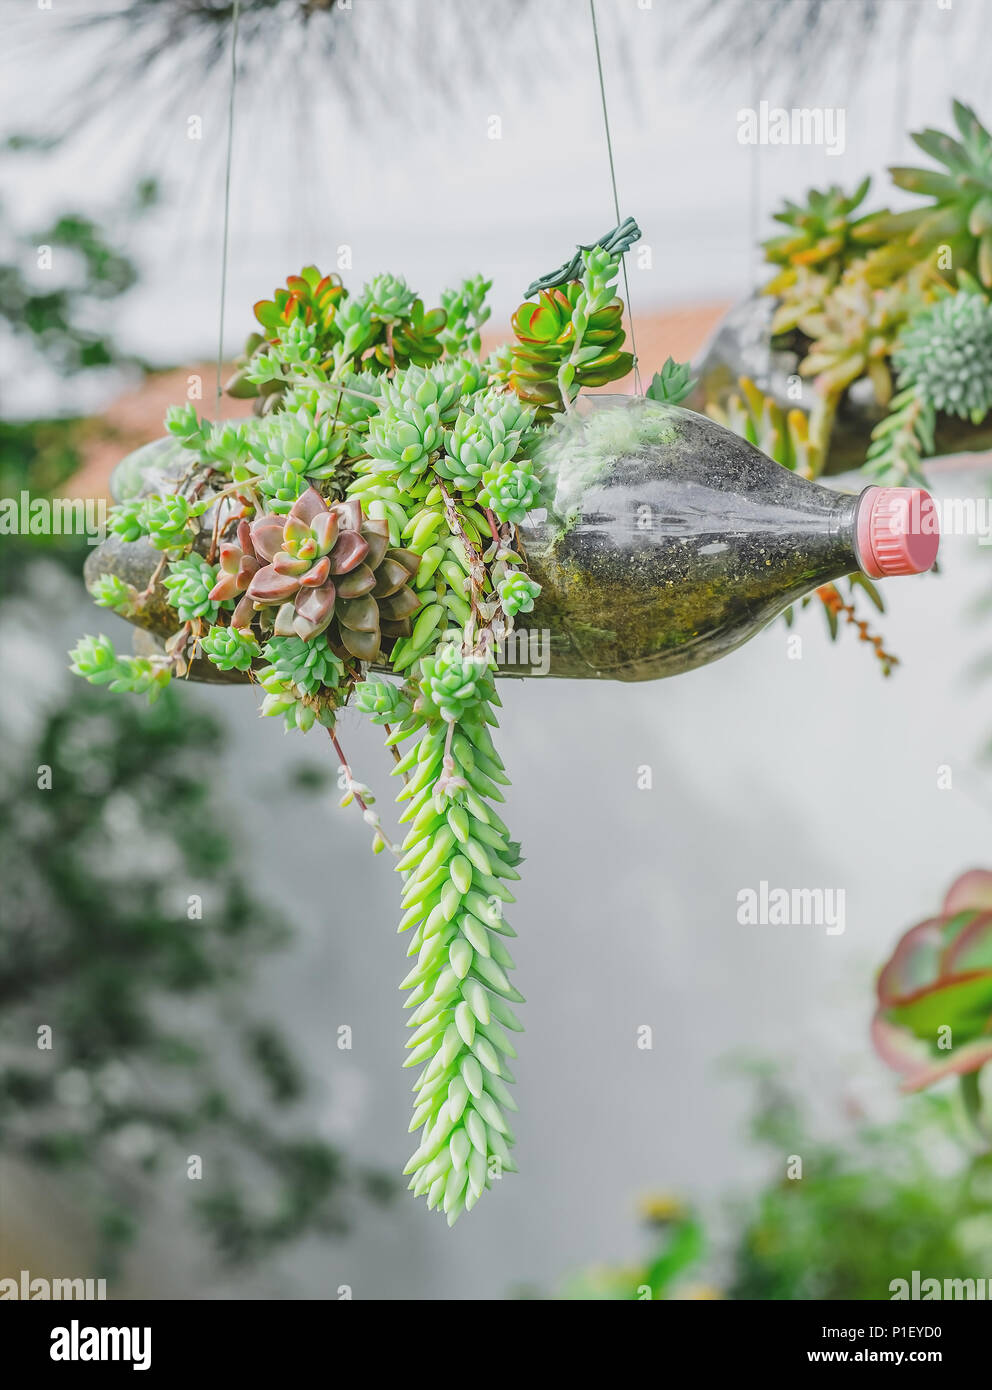 Green plant growing on a suspended reused soda bottle. Pet bottle used as a aerial vase for a plant. Stock Photo